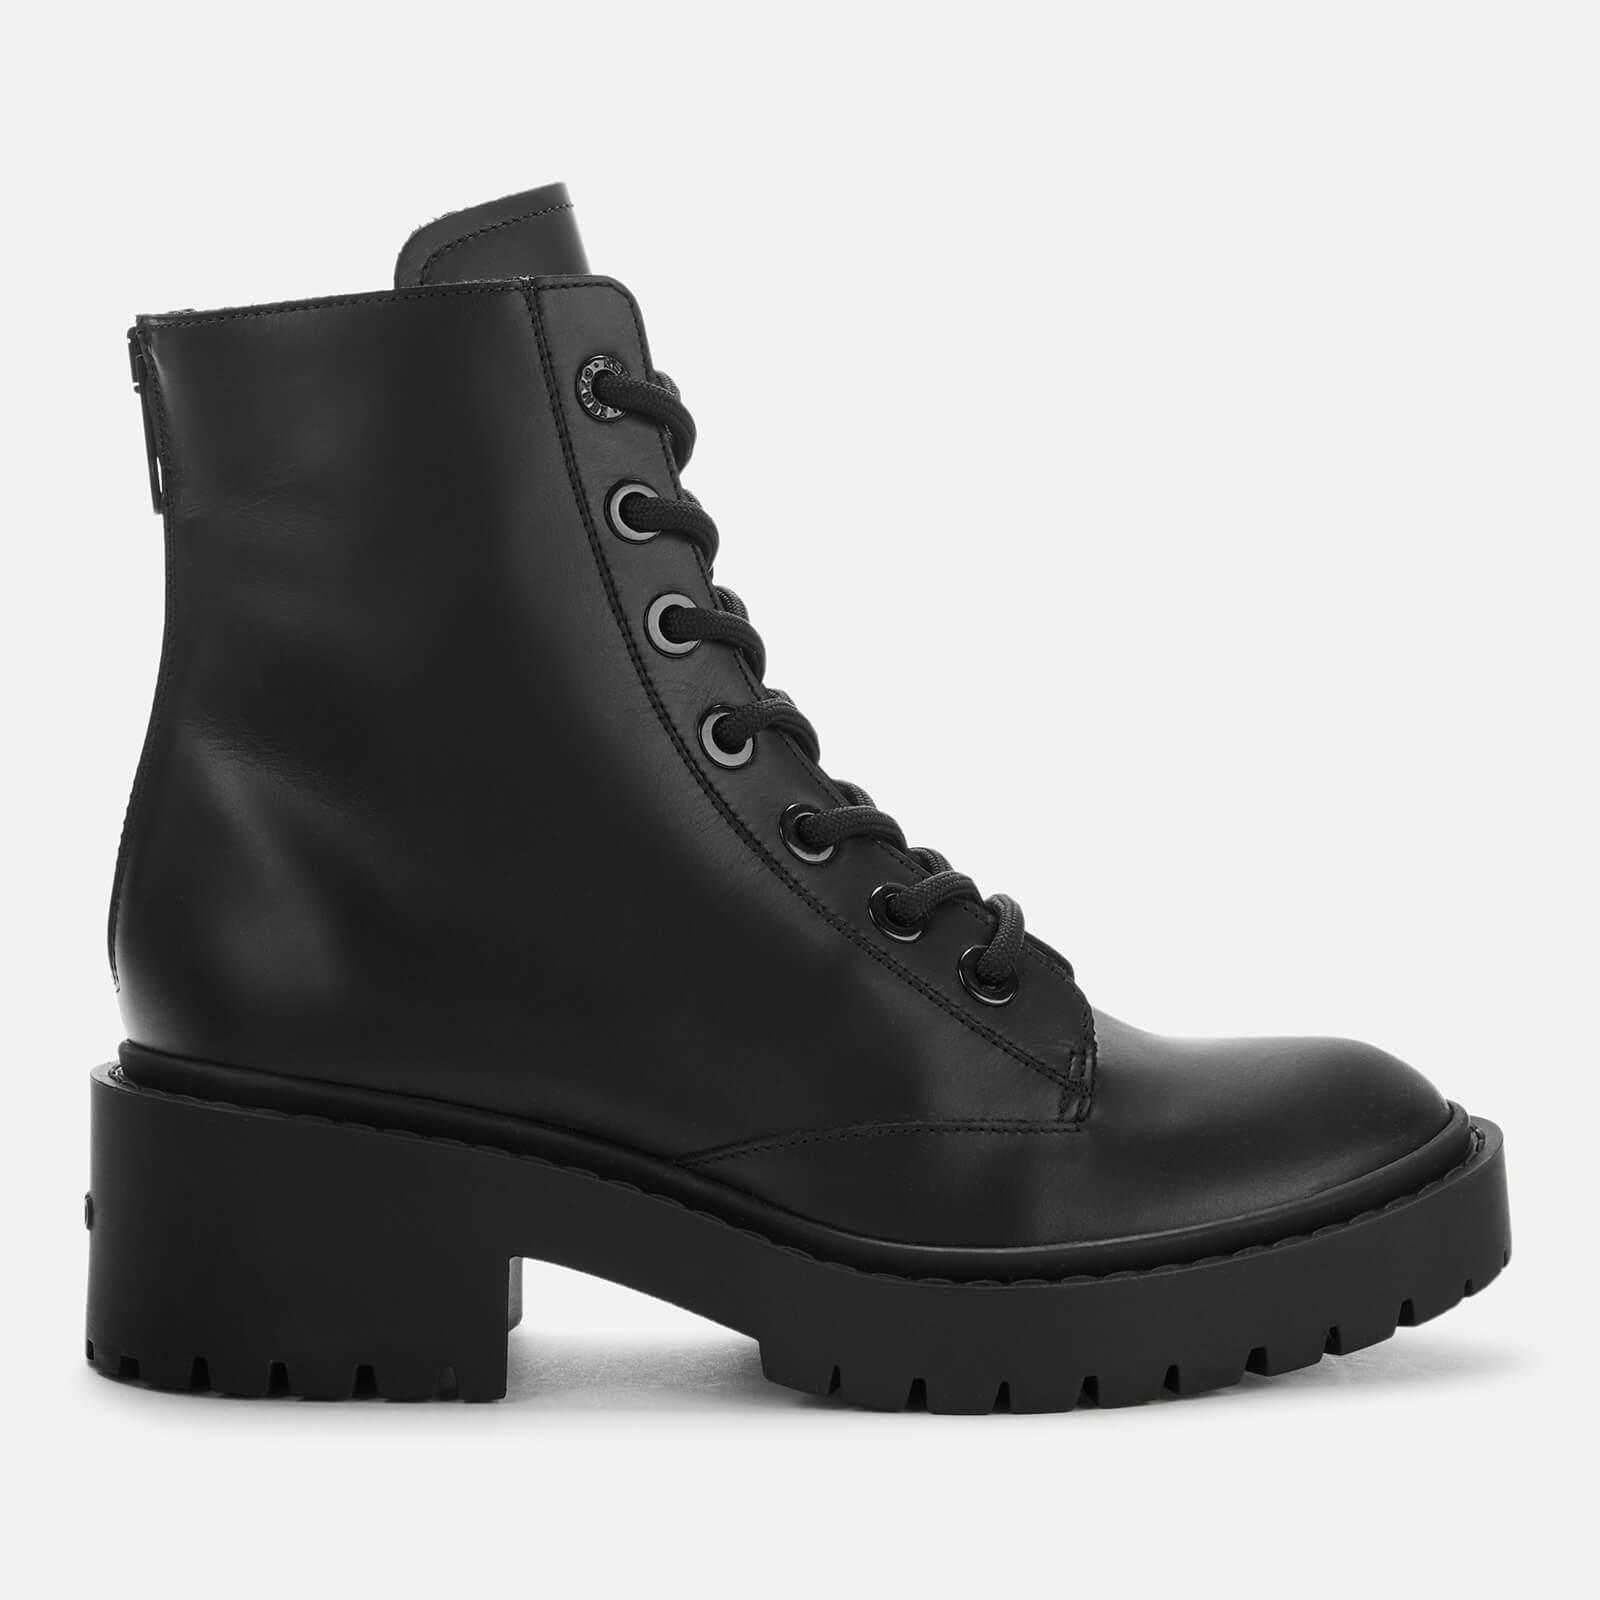 KENZO Leather Pike Lace Up Boots in Black - Lyst